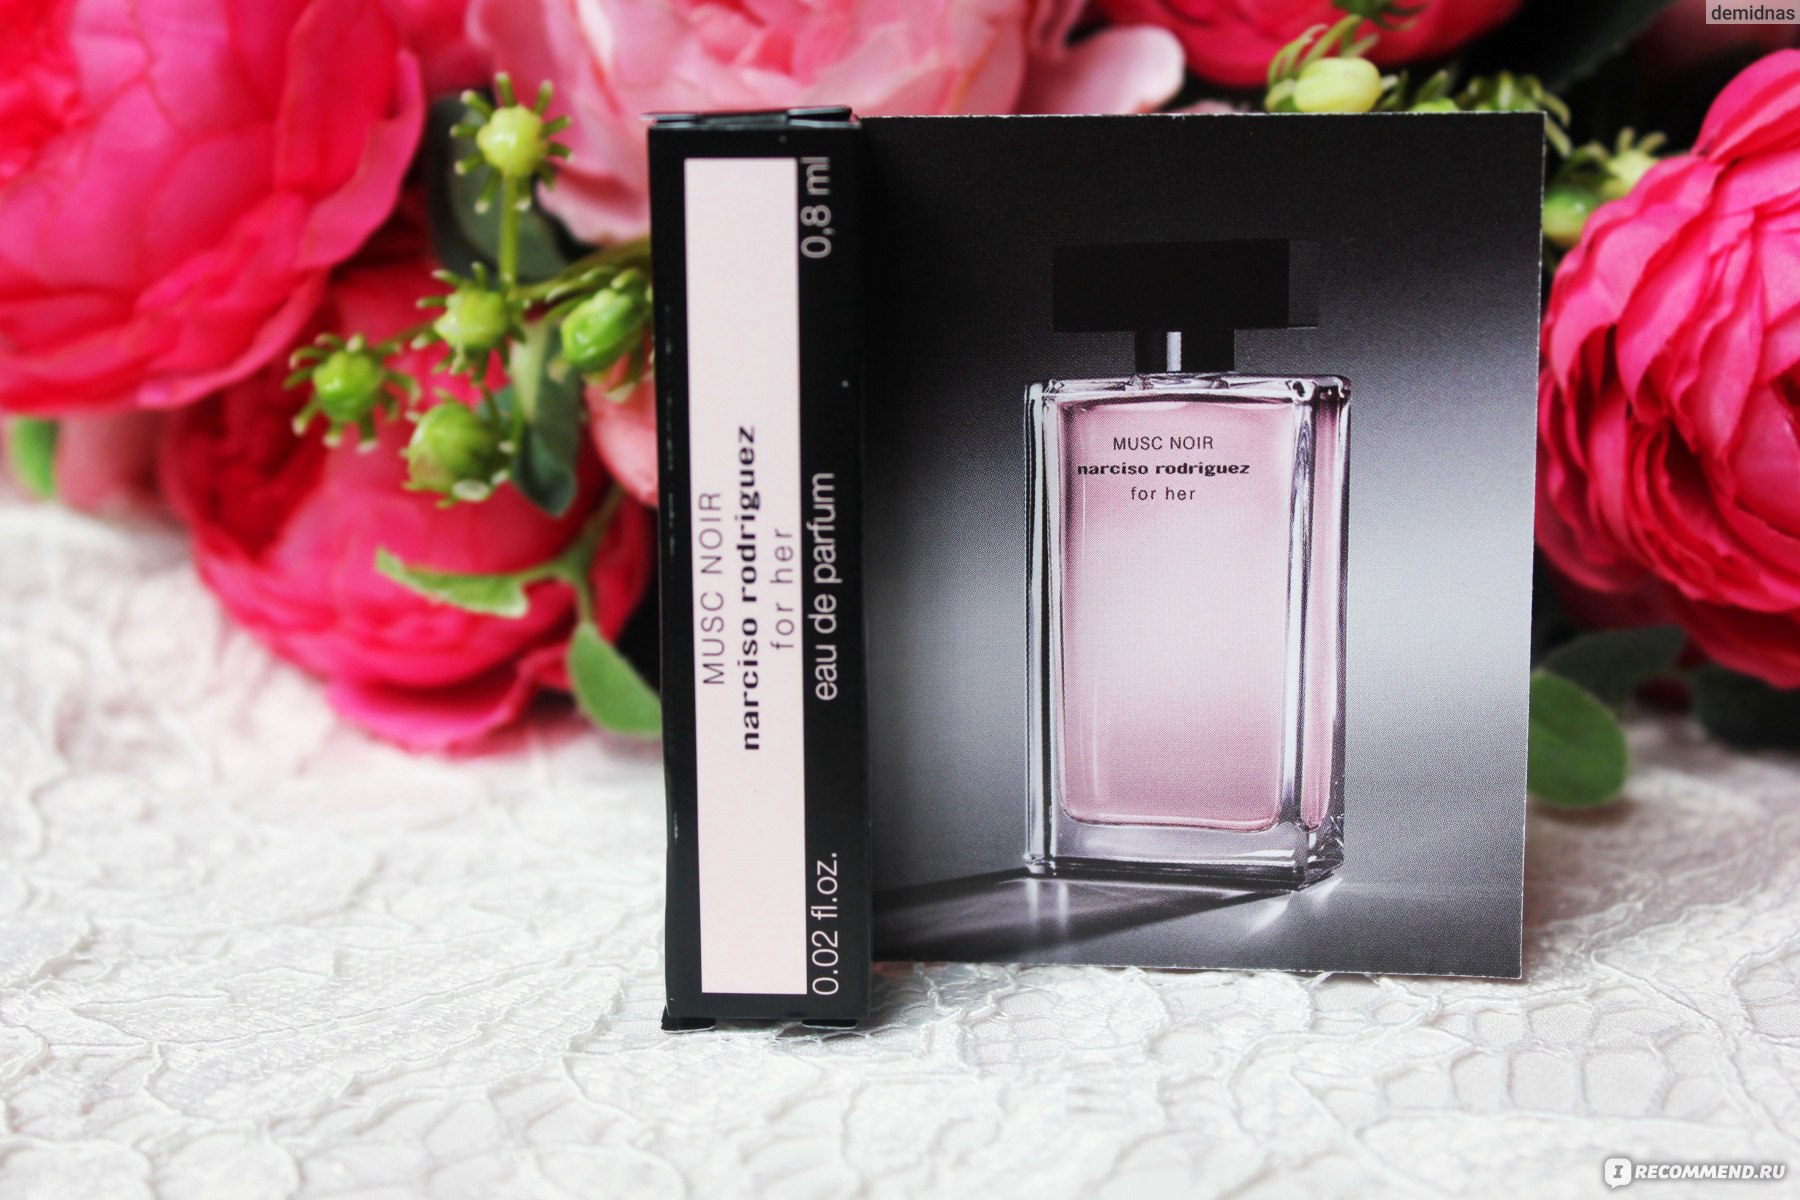 Narciso rodriguez musc noir rose. Narciso Rodriguez Musc Noir. Narciso Rodriguez Musc Noir Rose for her. Musc Noir от Narciso Rodriguez. Narciso Rodriguez for her Musk Noir Rose 100 ml.